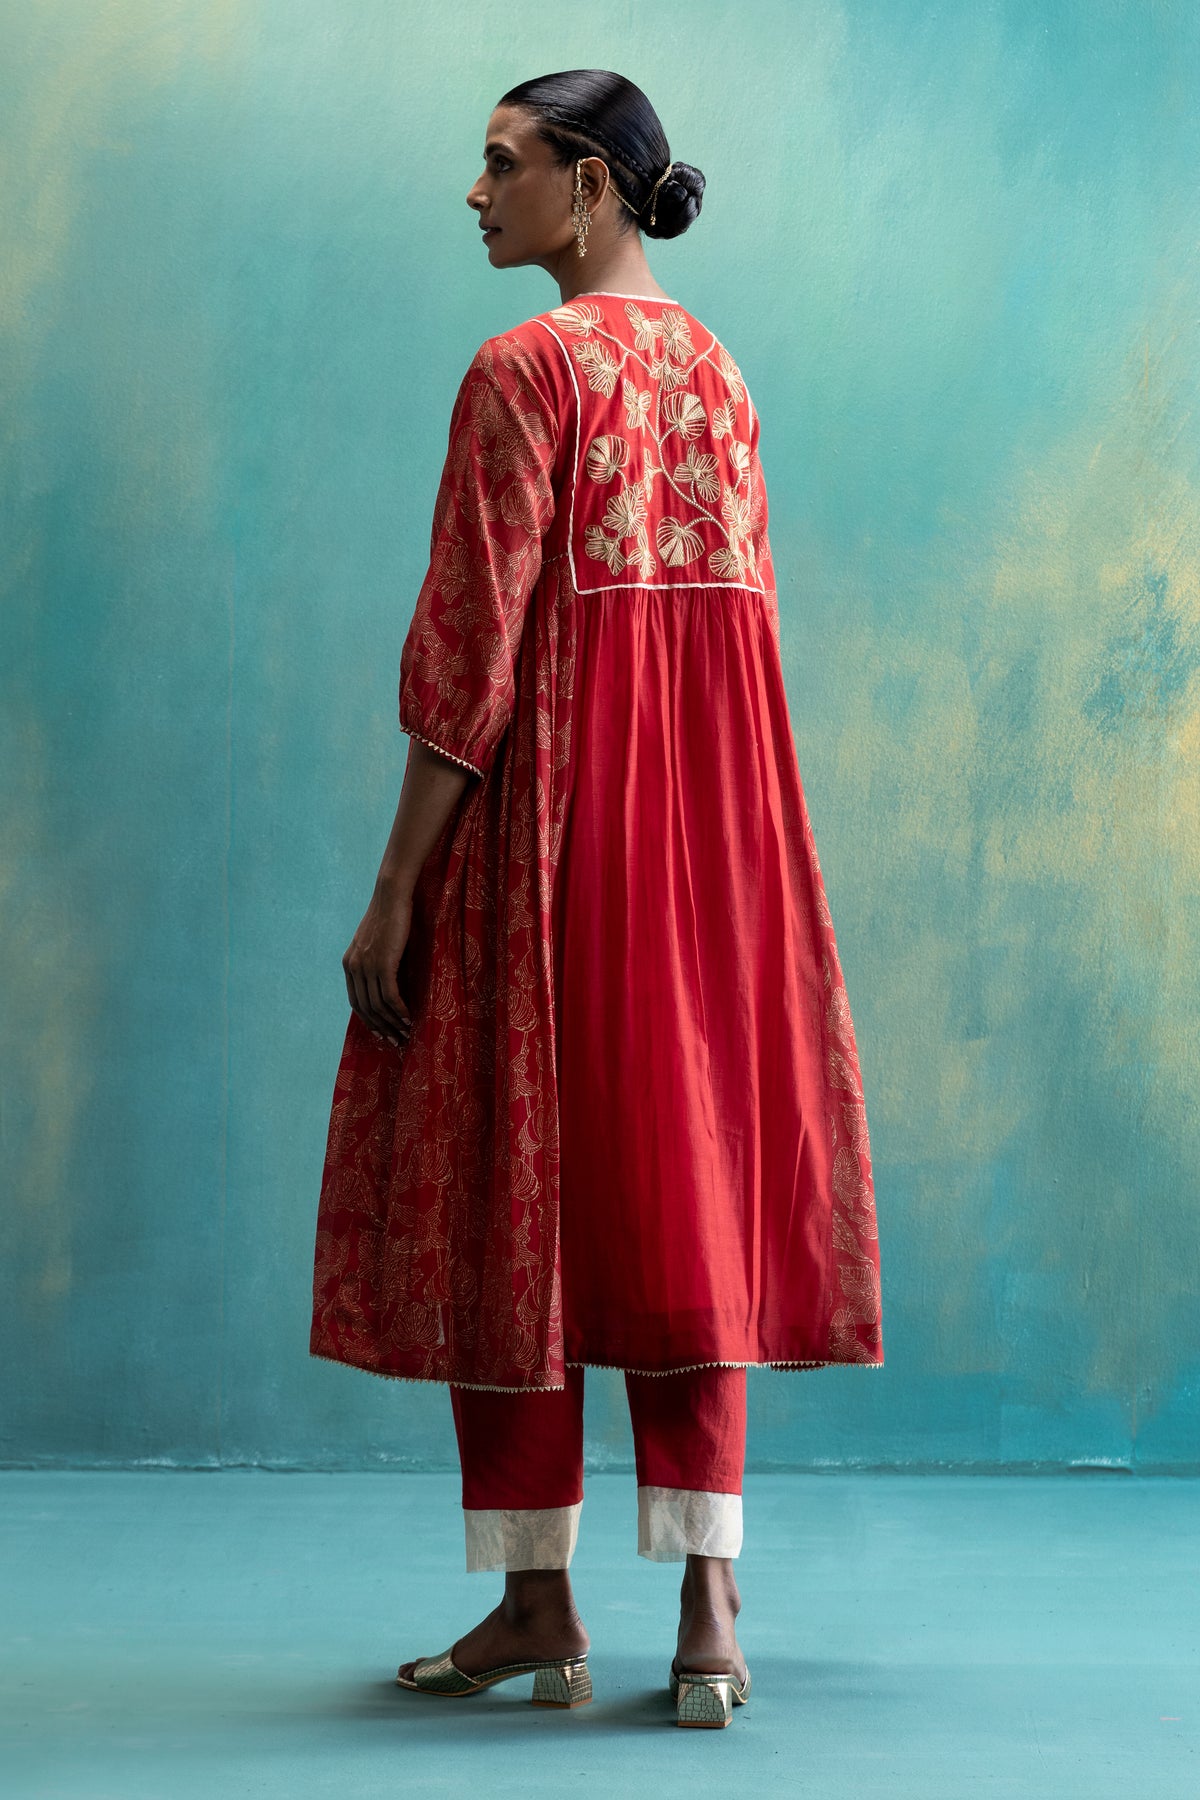 DIL-KASH RED CHANDERI FRONT AND BACK FLORAL EMBROIDERY WITH SIDE PLEATS AND GOLD BLOCK PRINT KURTA